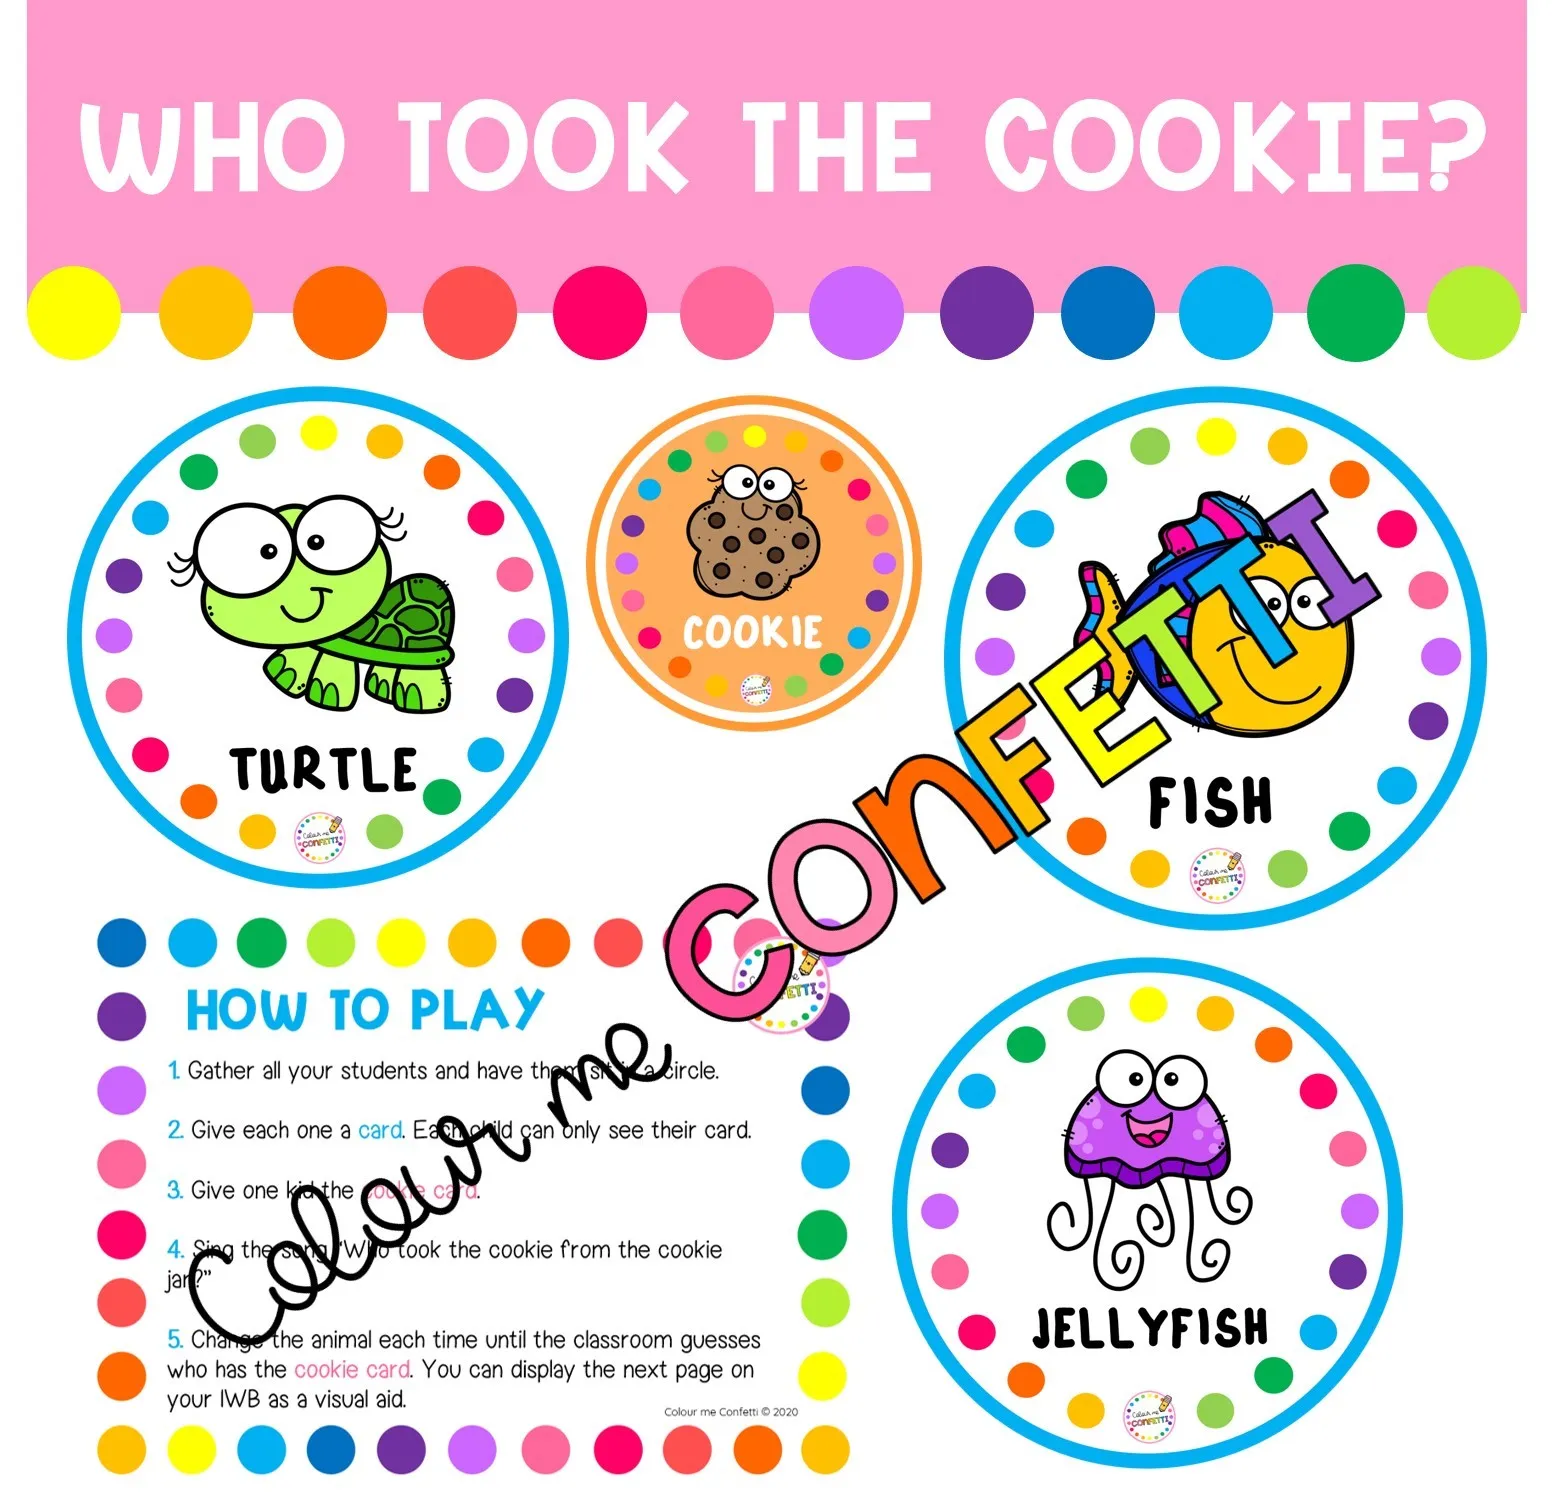 Who Took the Cookie? - Game